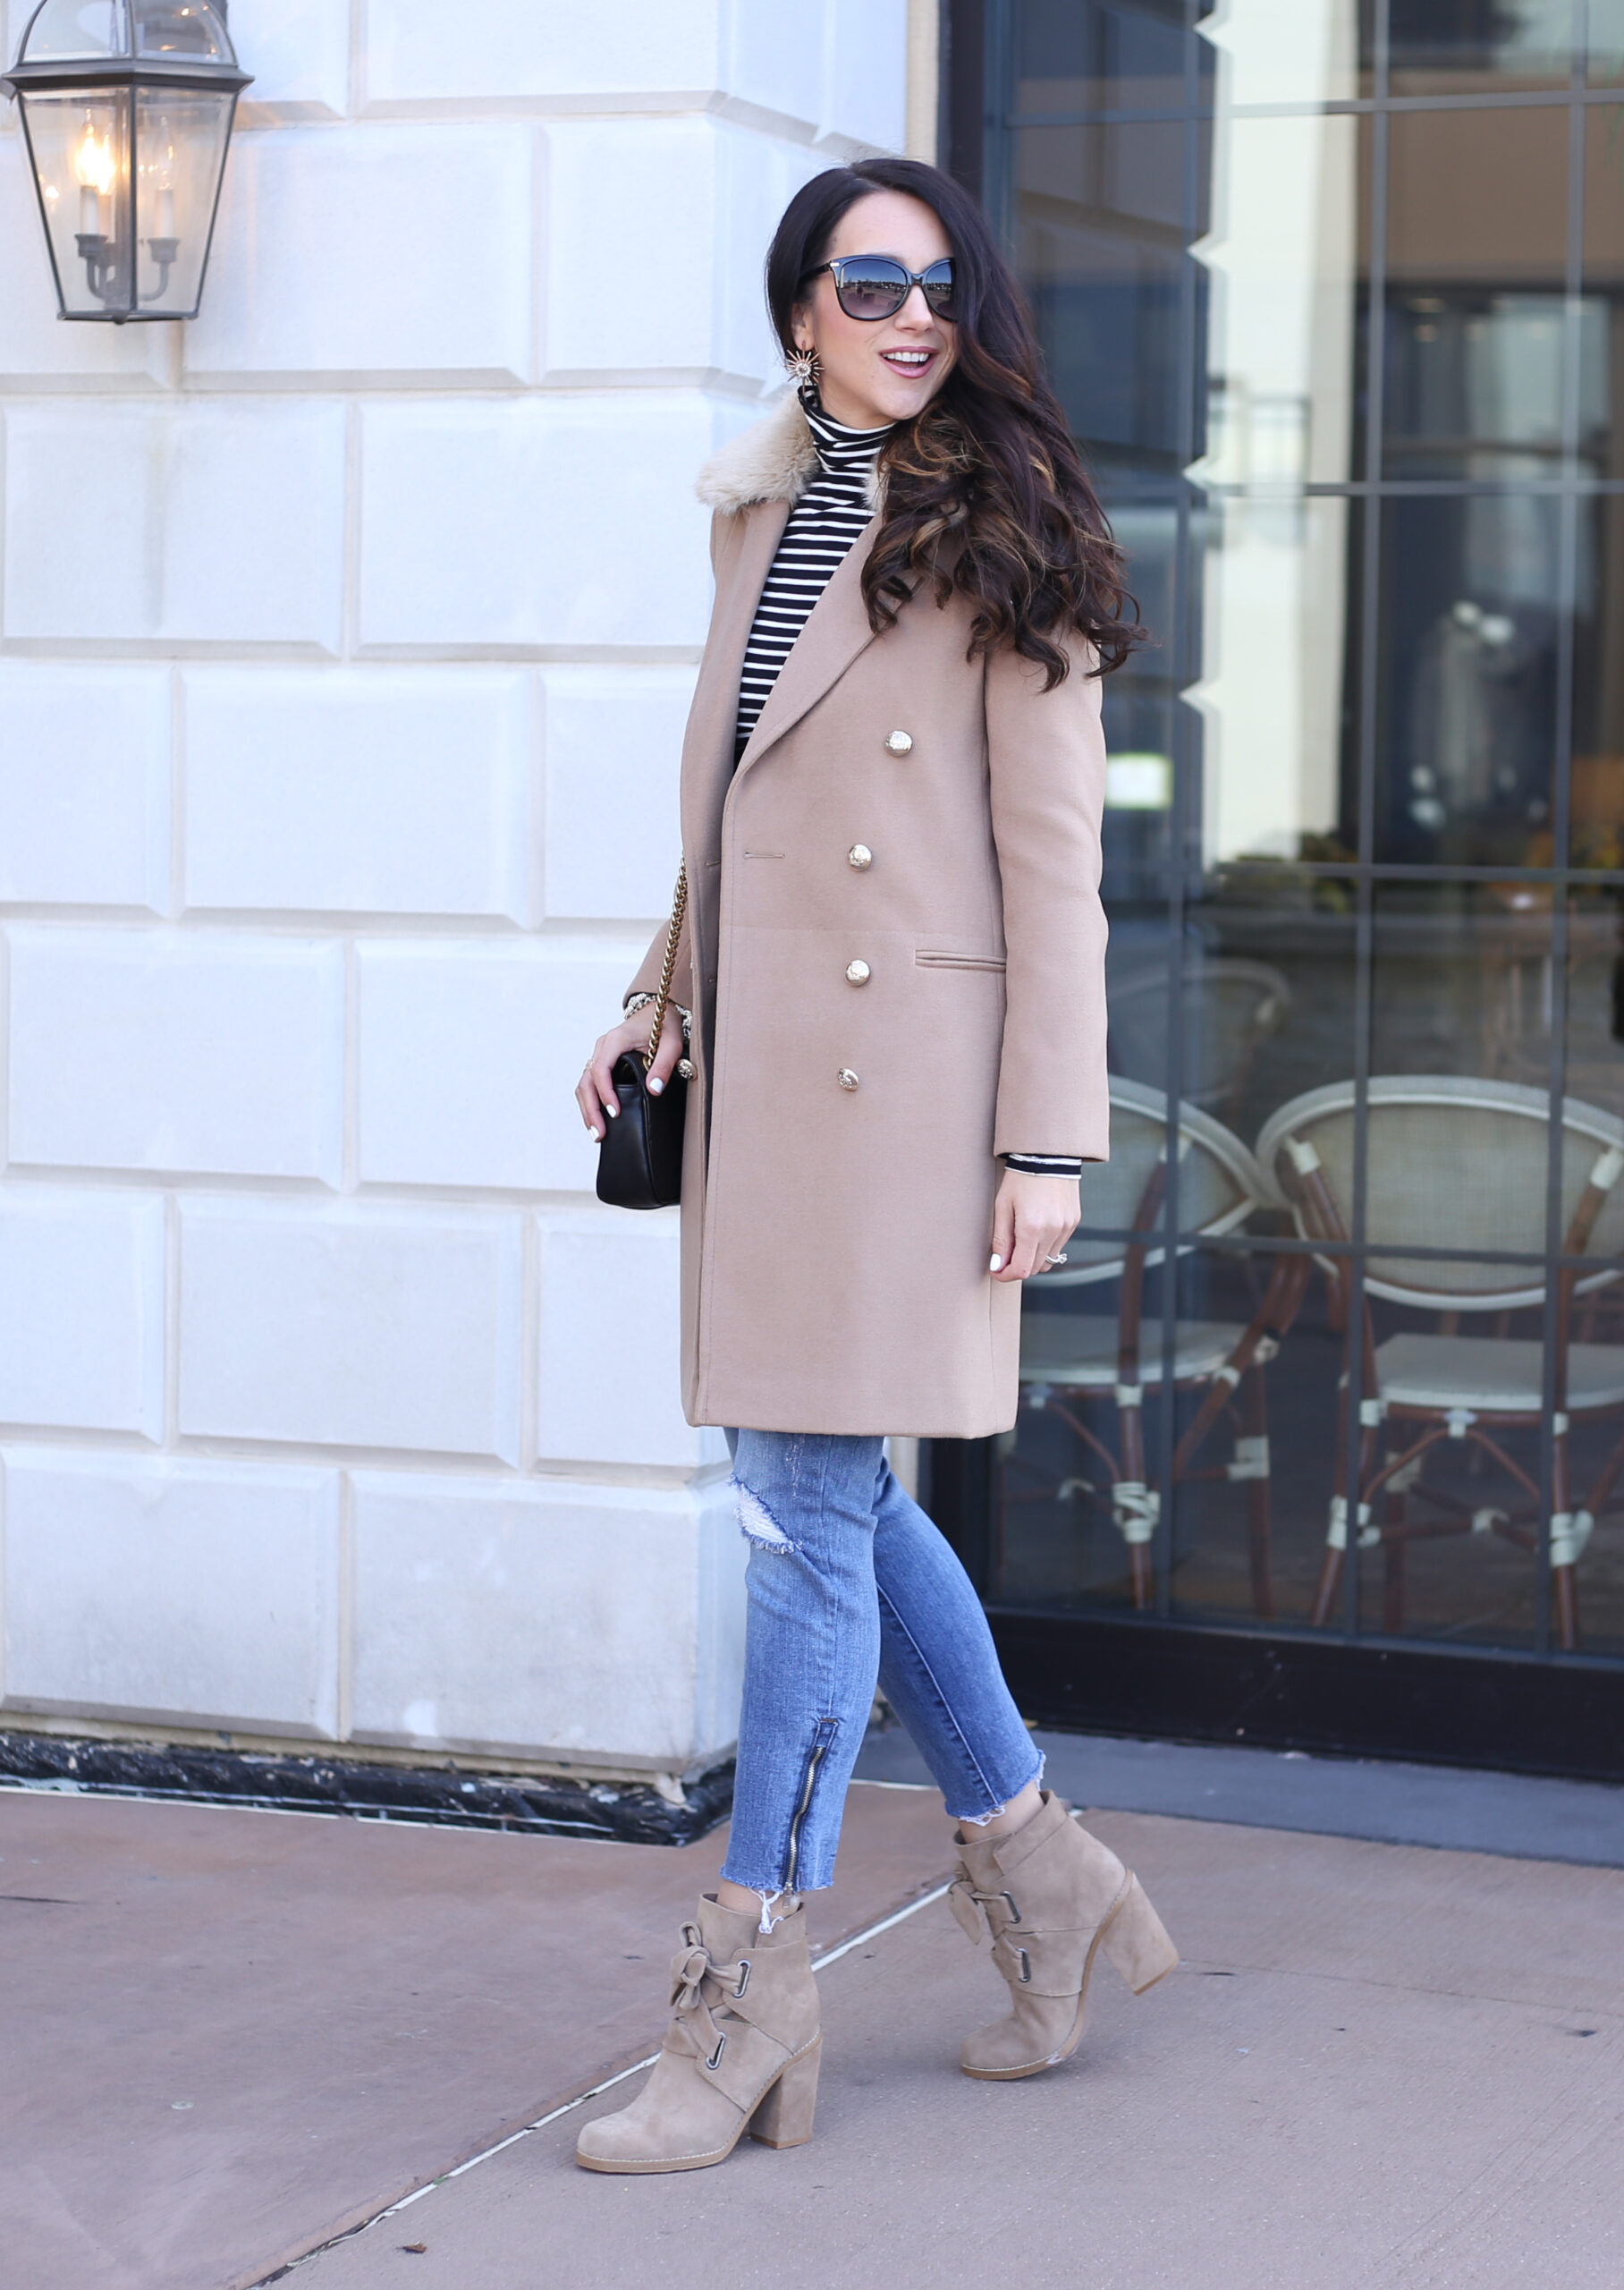 skinny jeans, block heel lace up booties and camel coat with faux fur collar